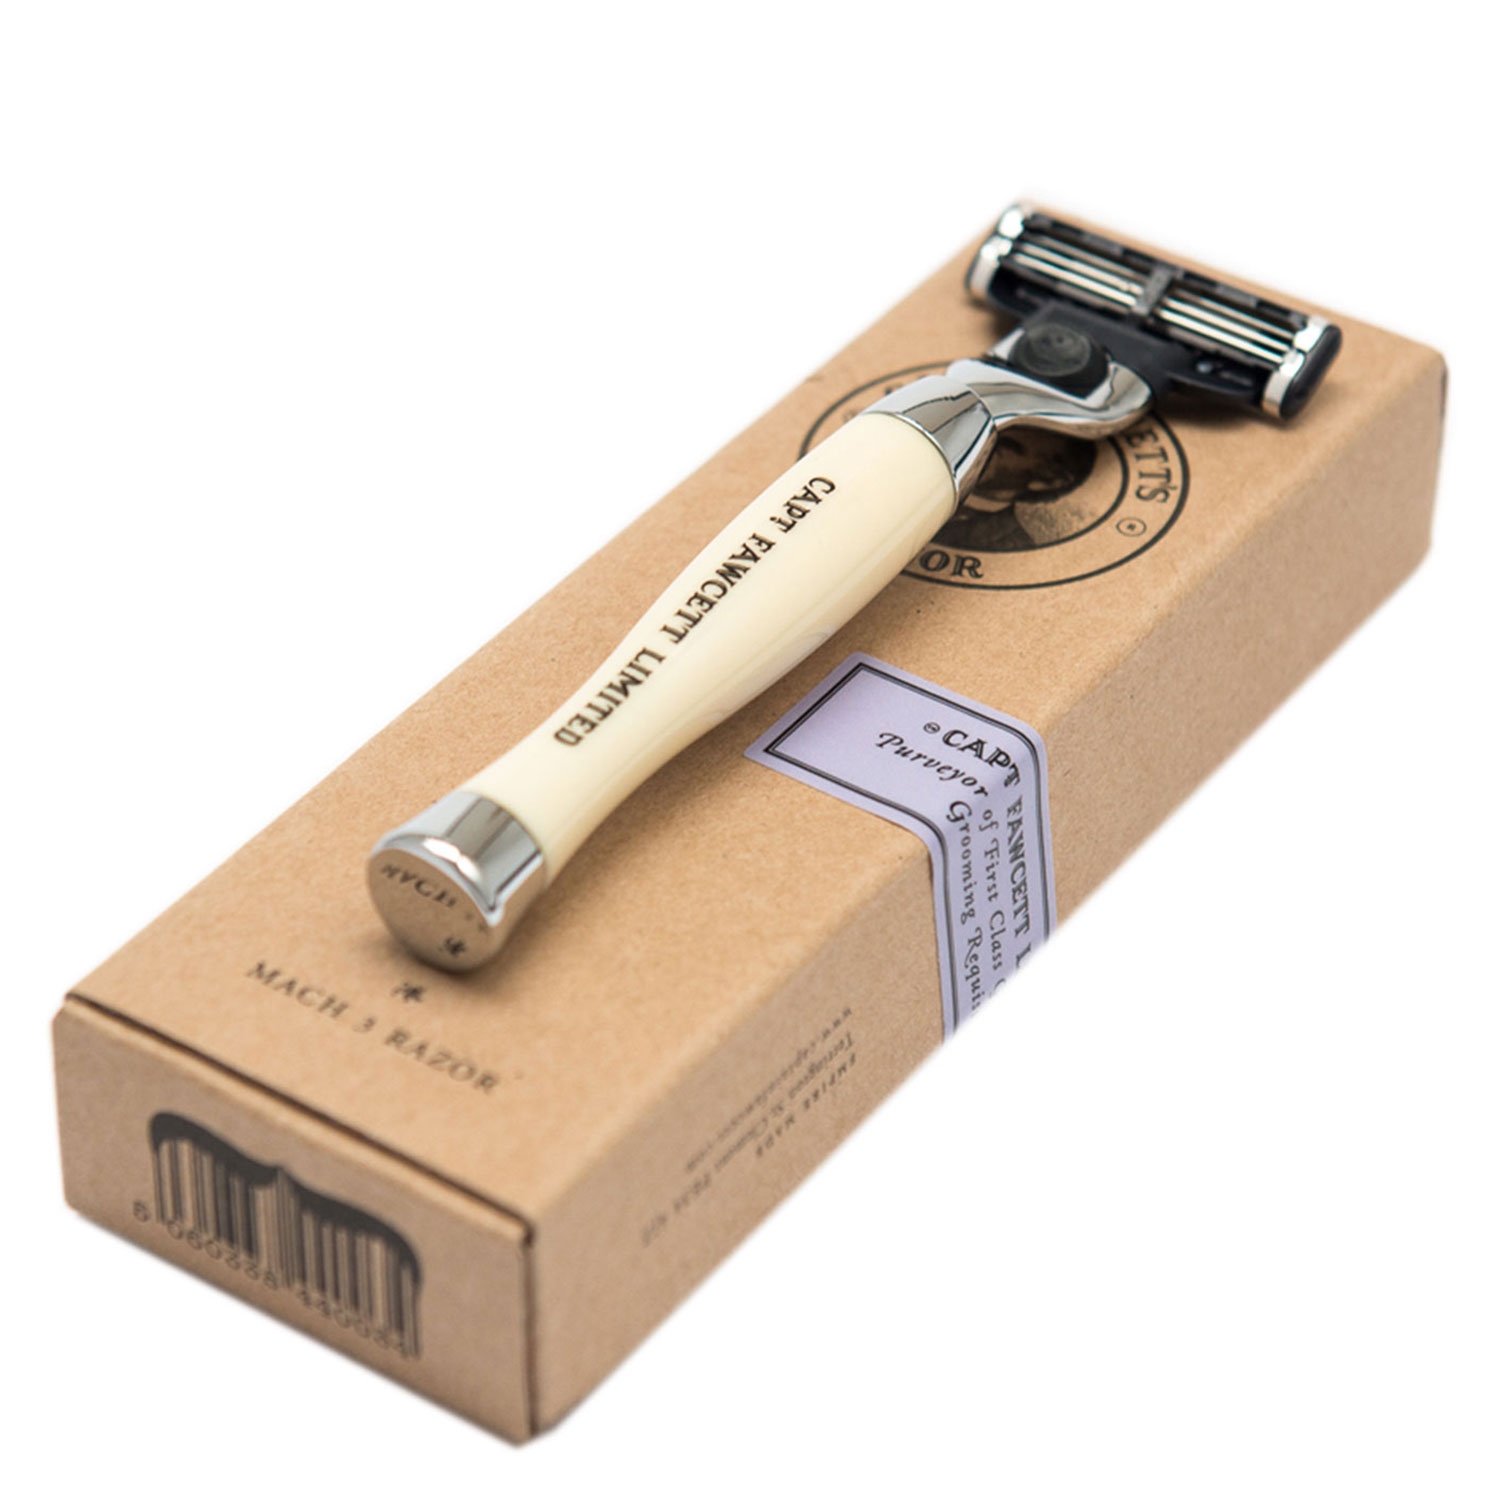 Product image from Capt. Fawcett Tools - Finest Hand Crafted Safety Razor